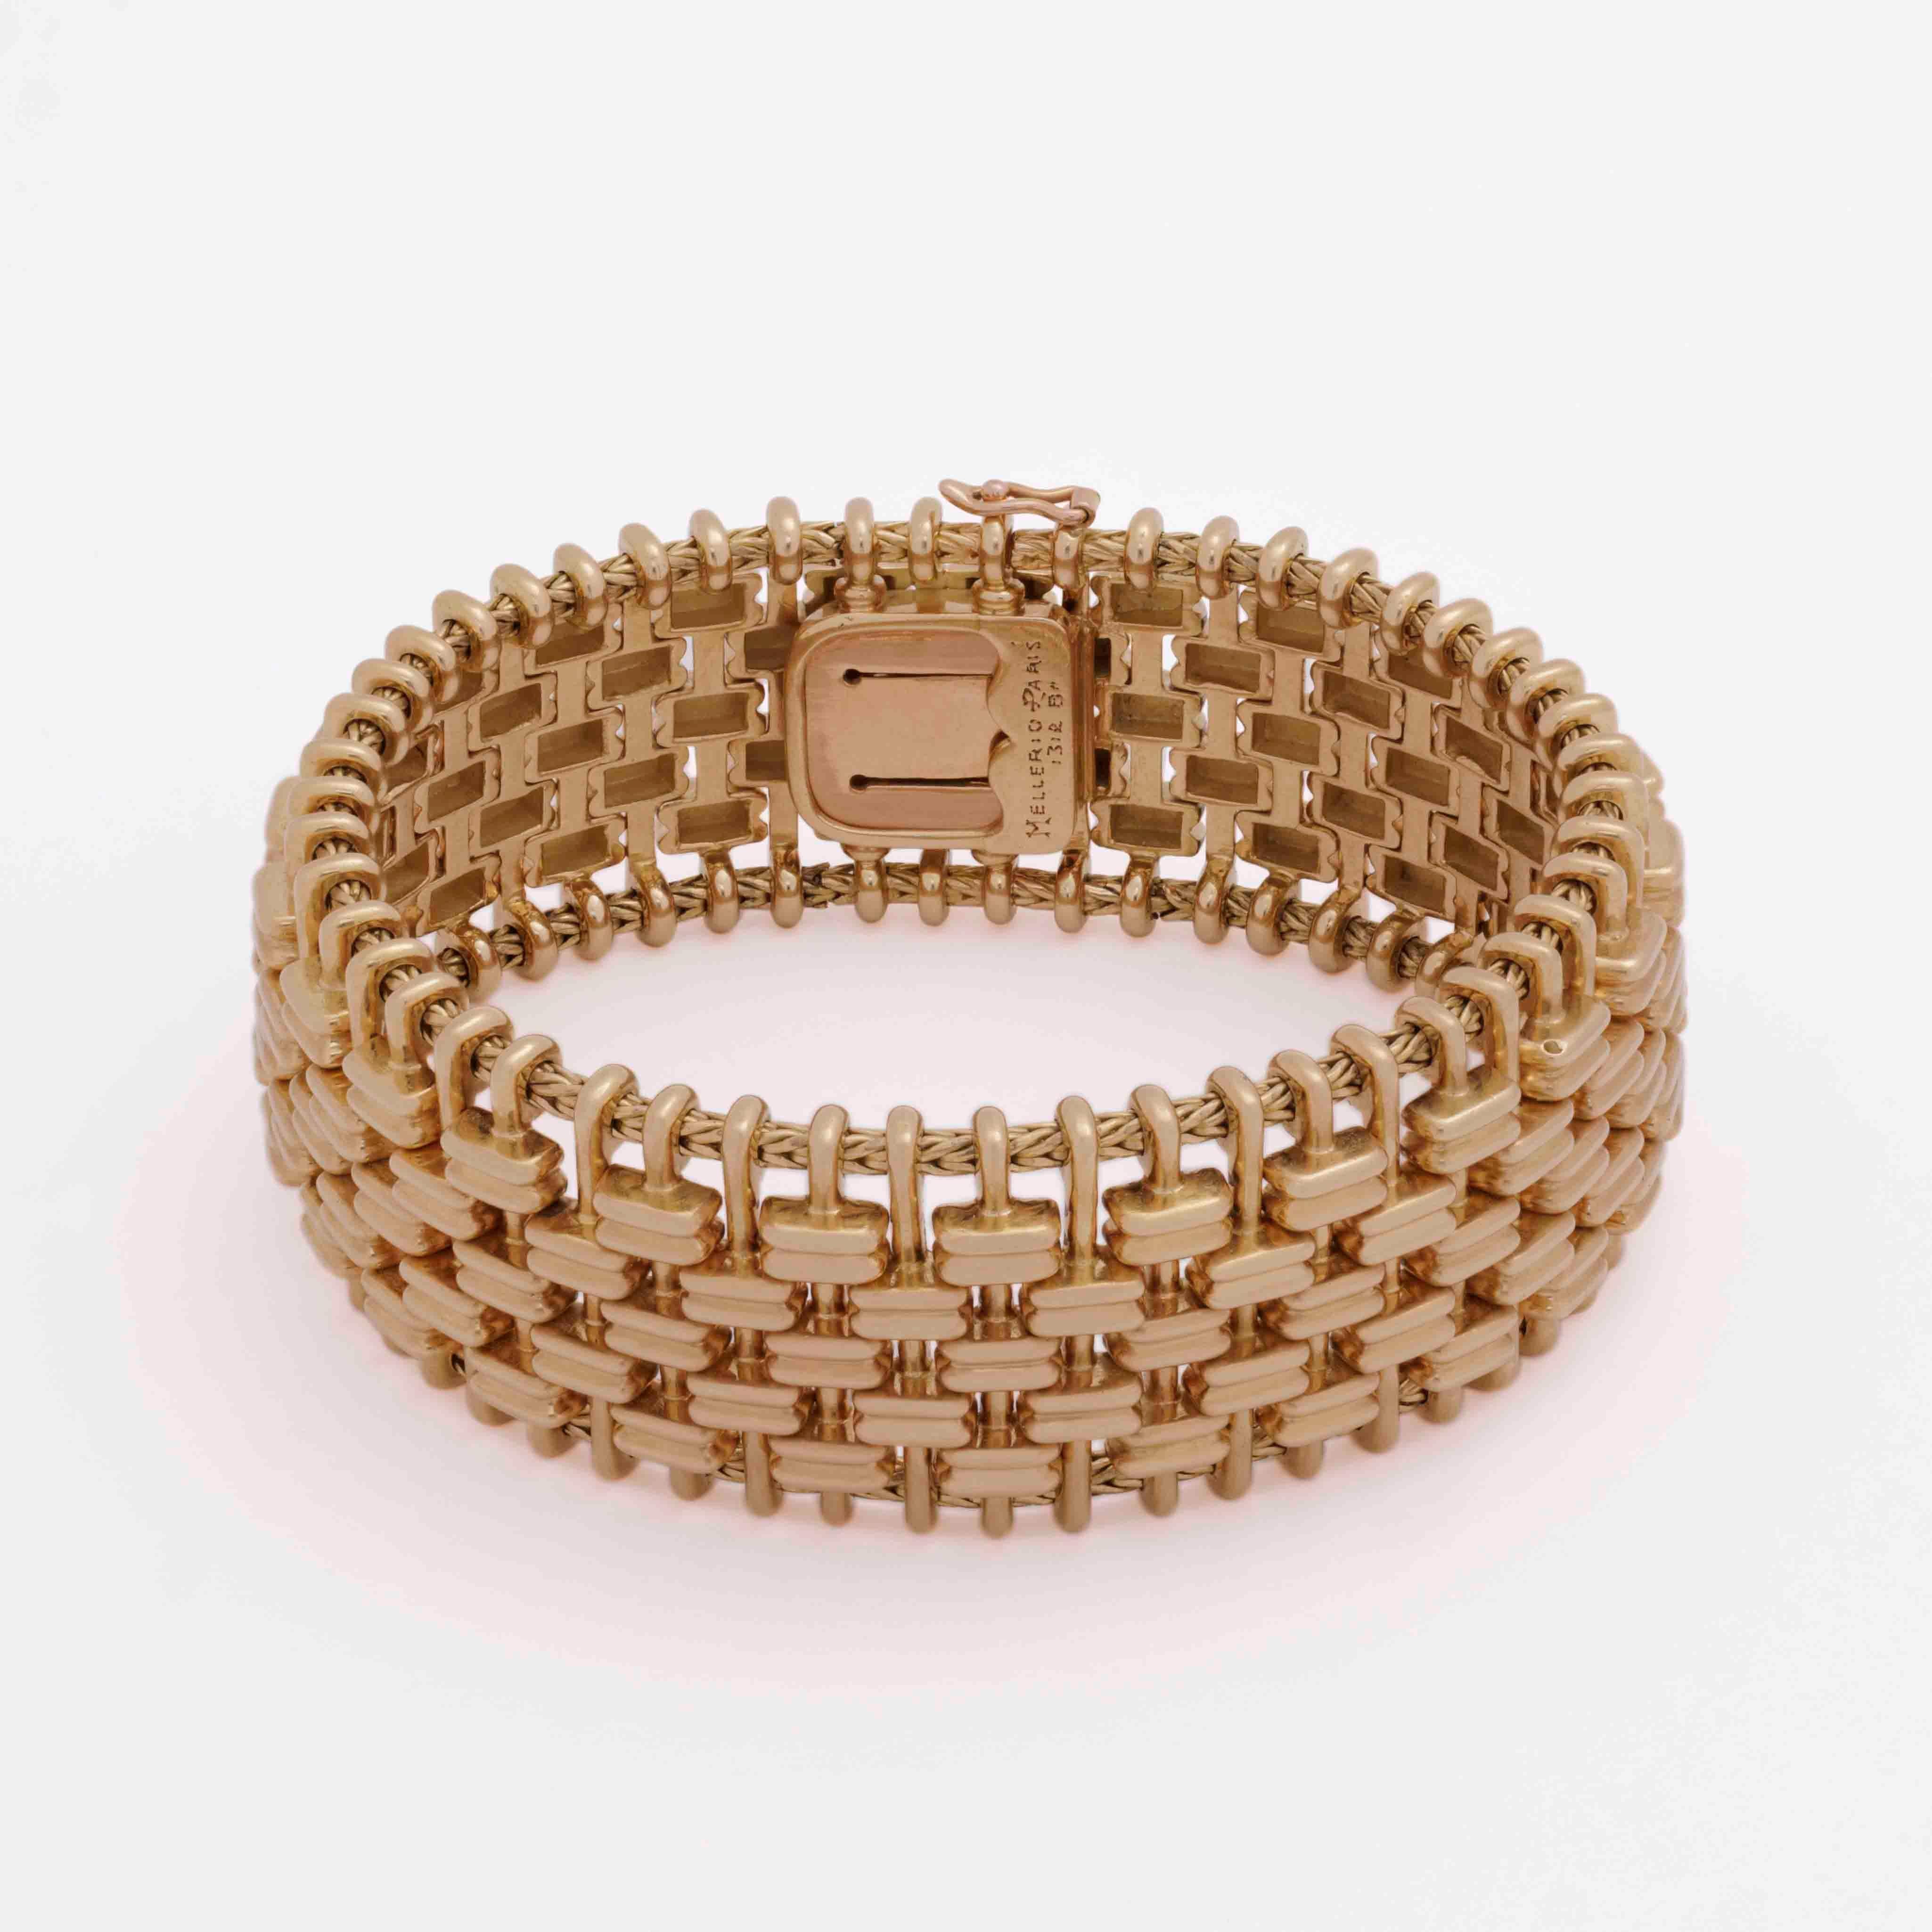 Vintage 18 Karat Mellerio Dits Meller Bracelet

7 inches length
1 inch wide
98 grams
Made in France

Slip into french luxury with our Vintage 18k Yellow Gold Mellerio Dits Meller Bracelet. Crafted by the oldest jewelry house in France, with a legacy